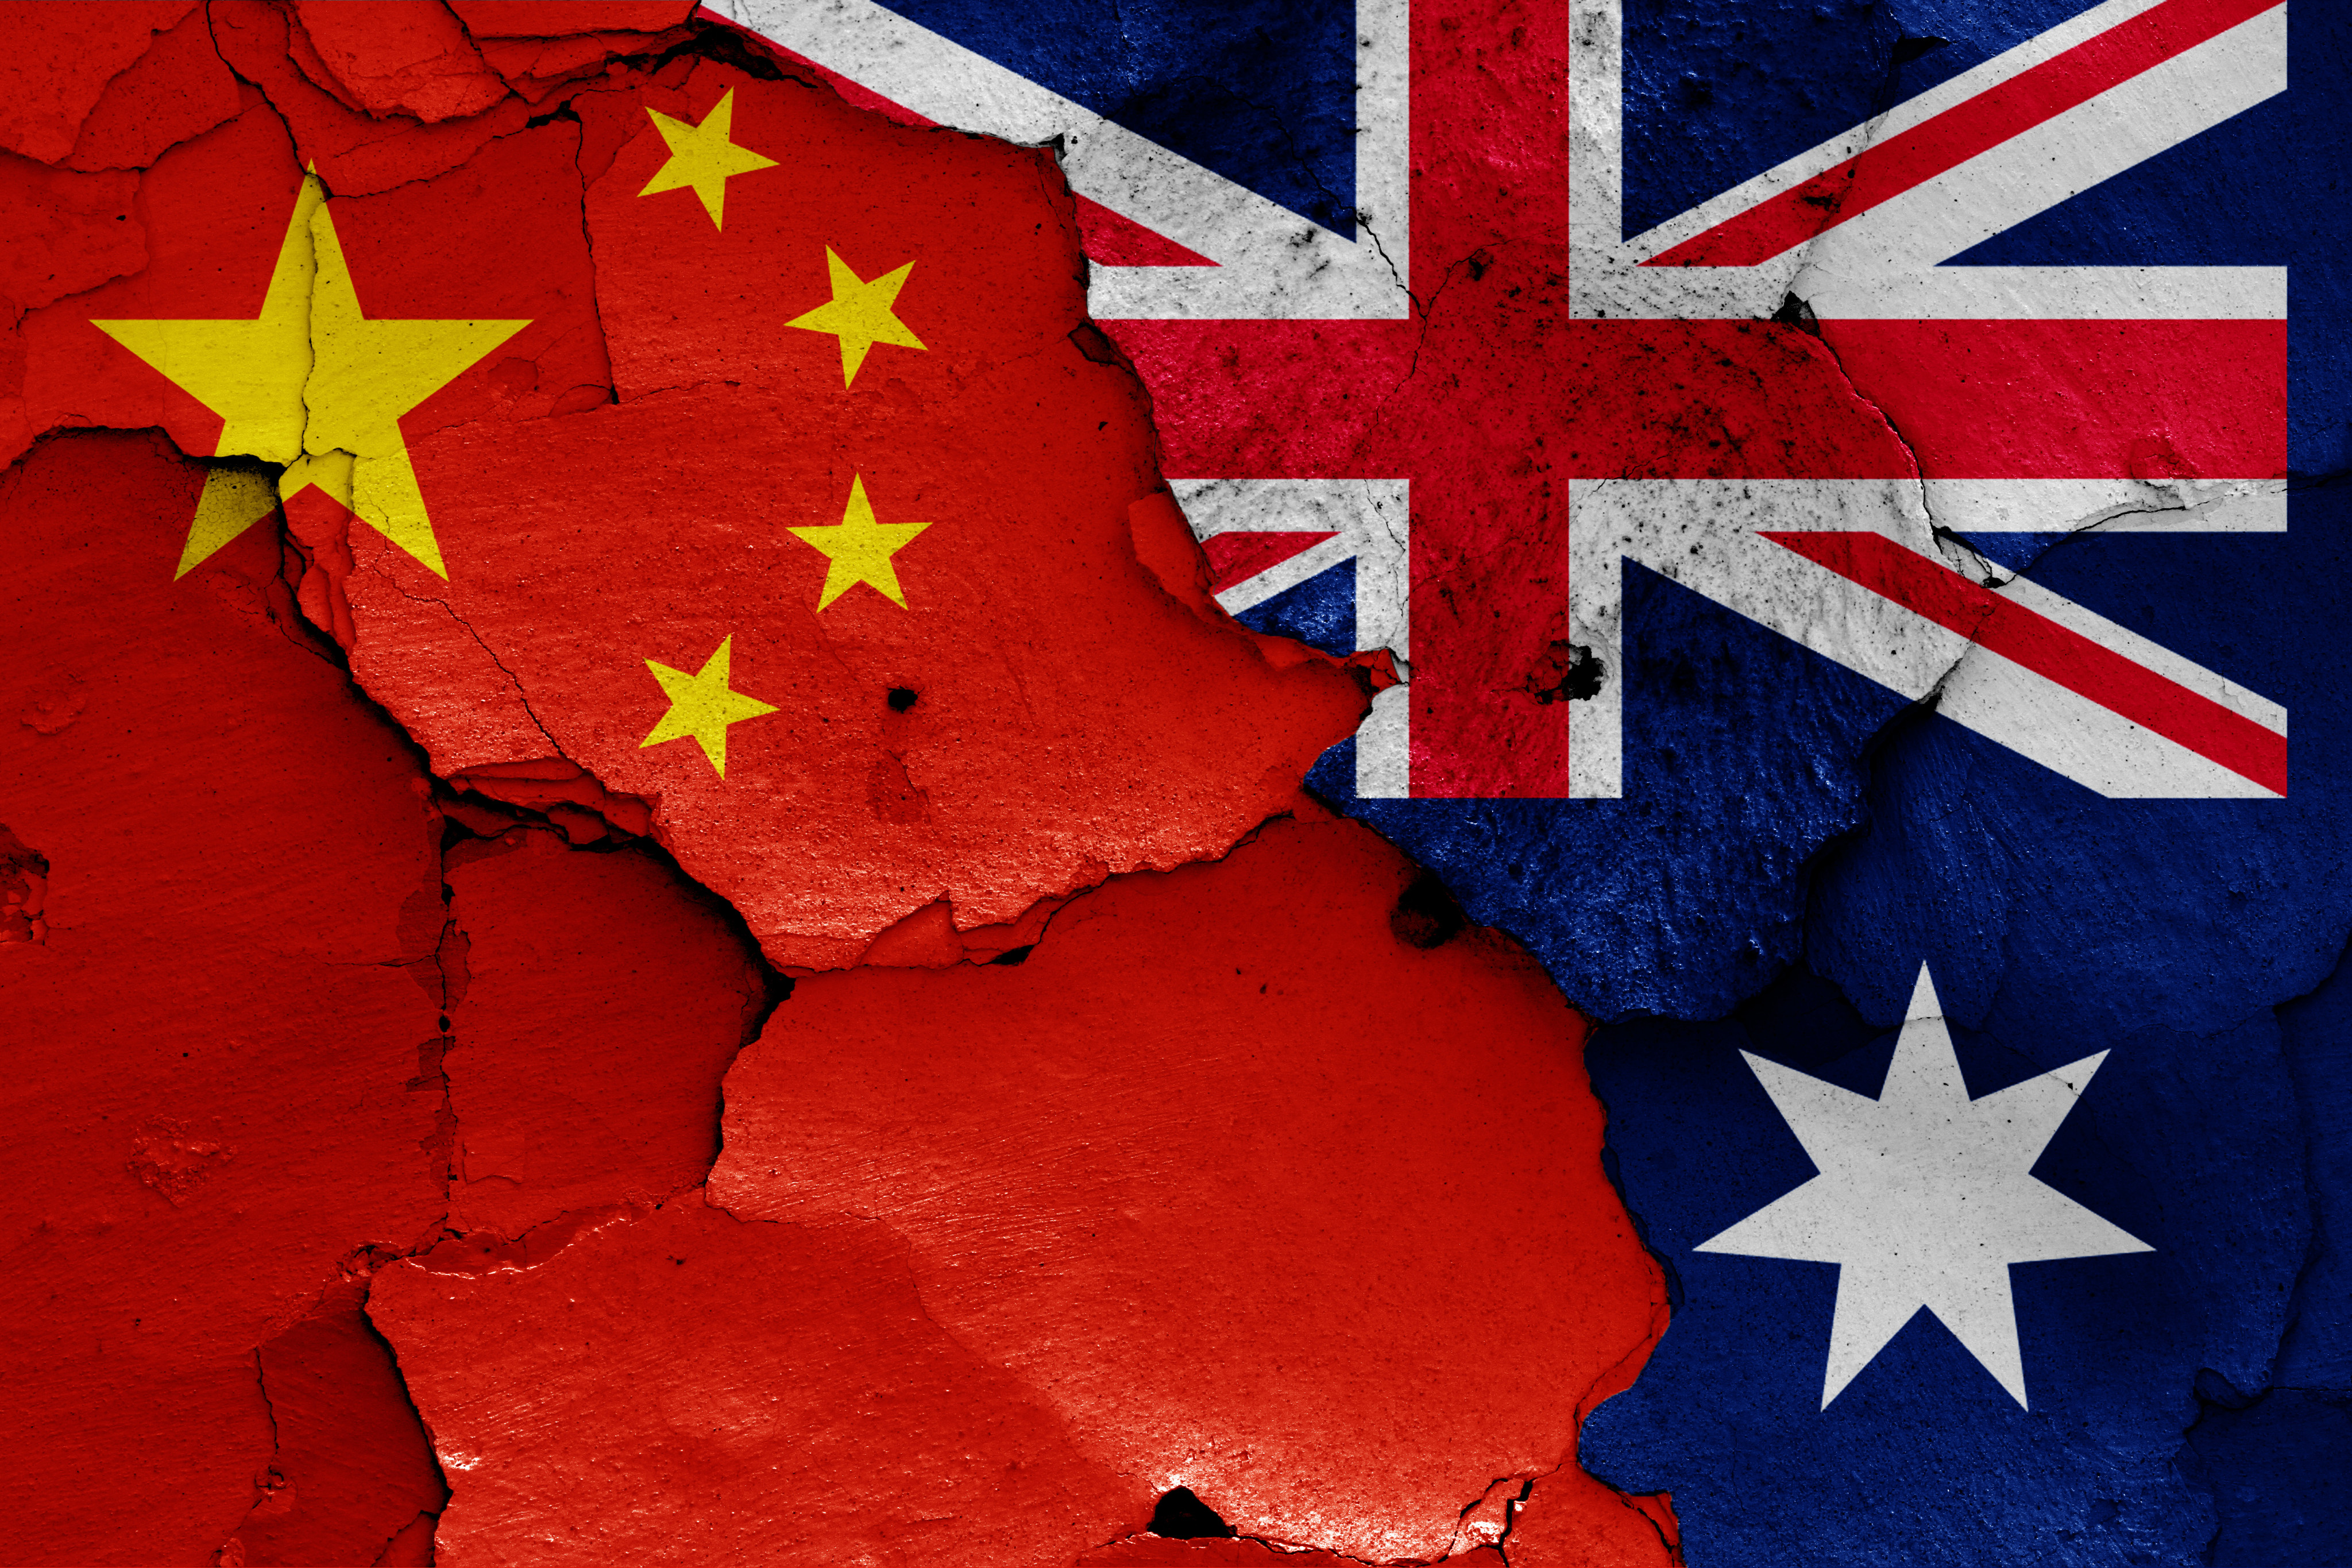 China responded to a call for an investigation into the origins of the coronaviru swith a series of tariffs and unofficial bans on a wide range of goods, although Australian coal and lobsters are set to return to the Chinese market. Photo: Shutterstock